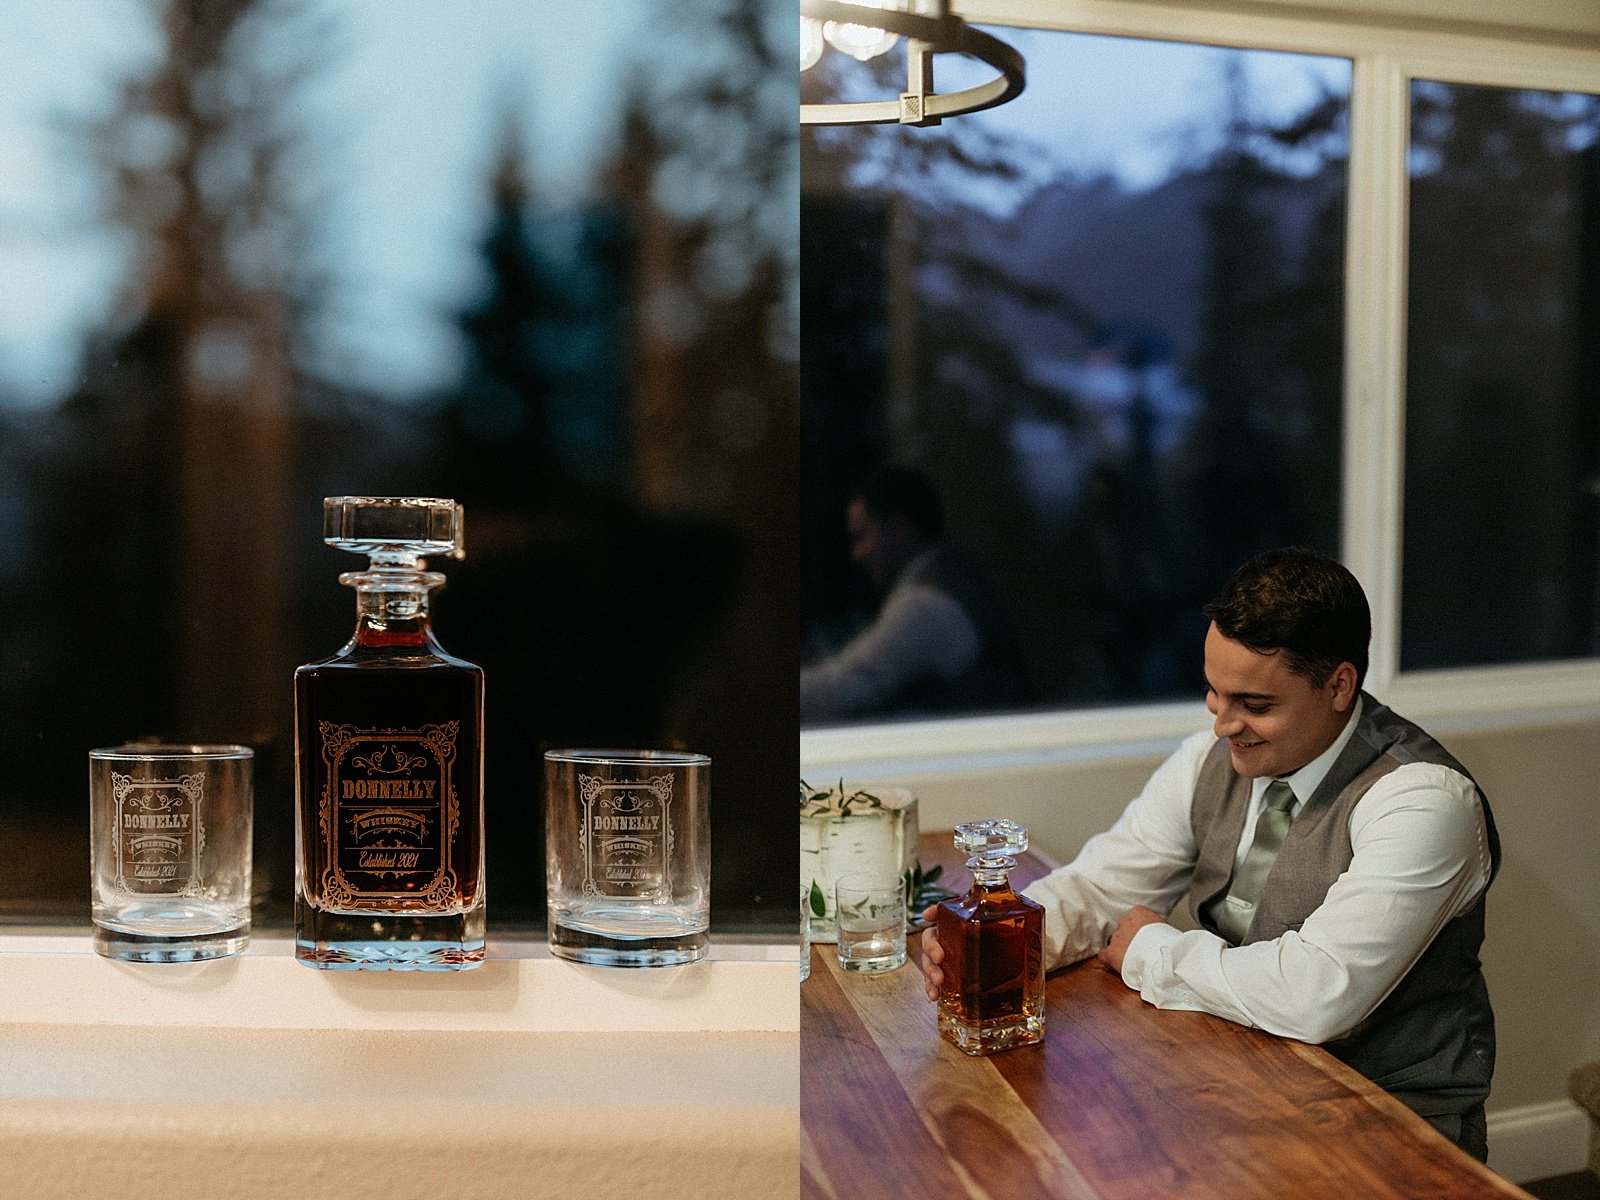  Groom drinking whiskey after intimate elopement in Alaska  